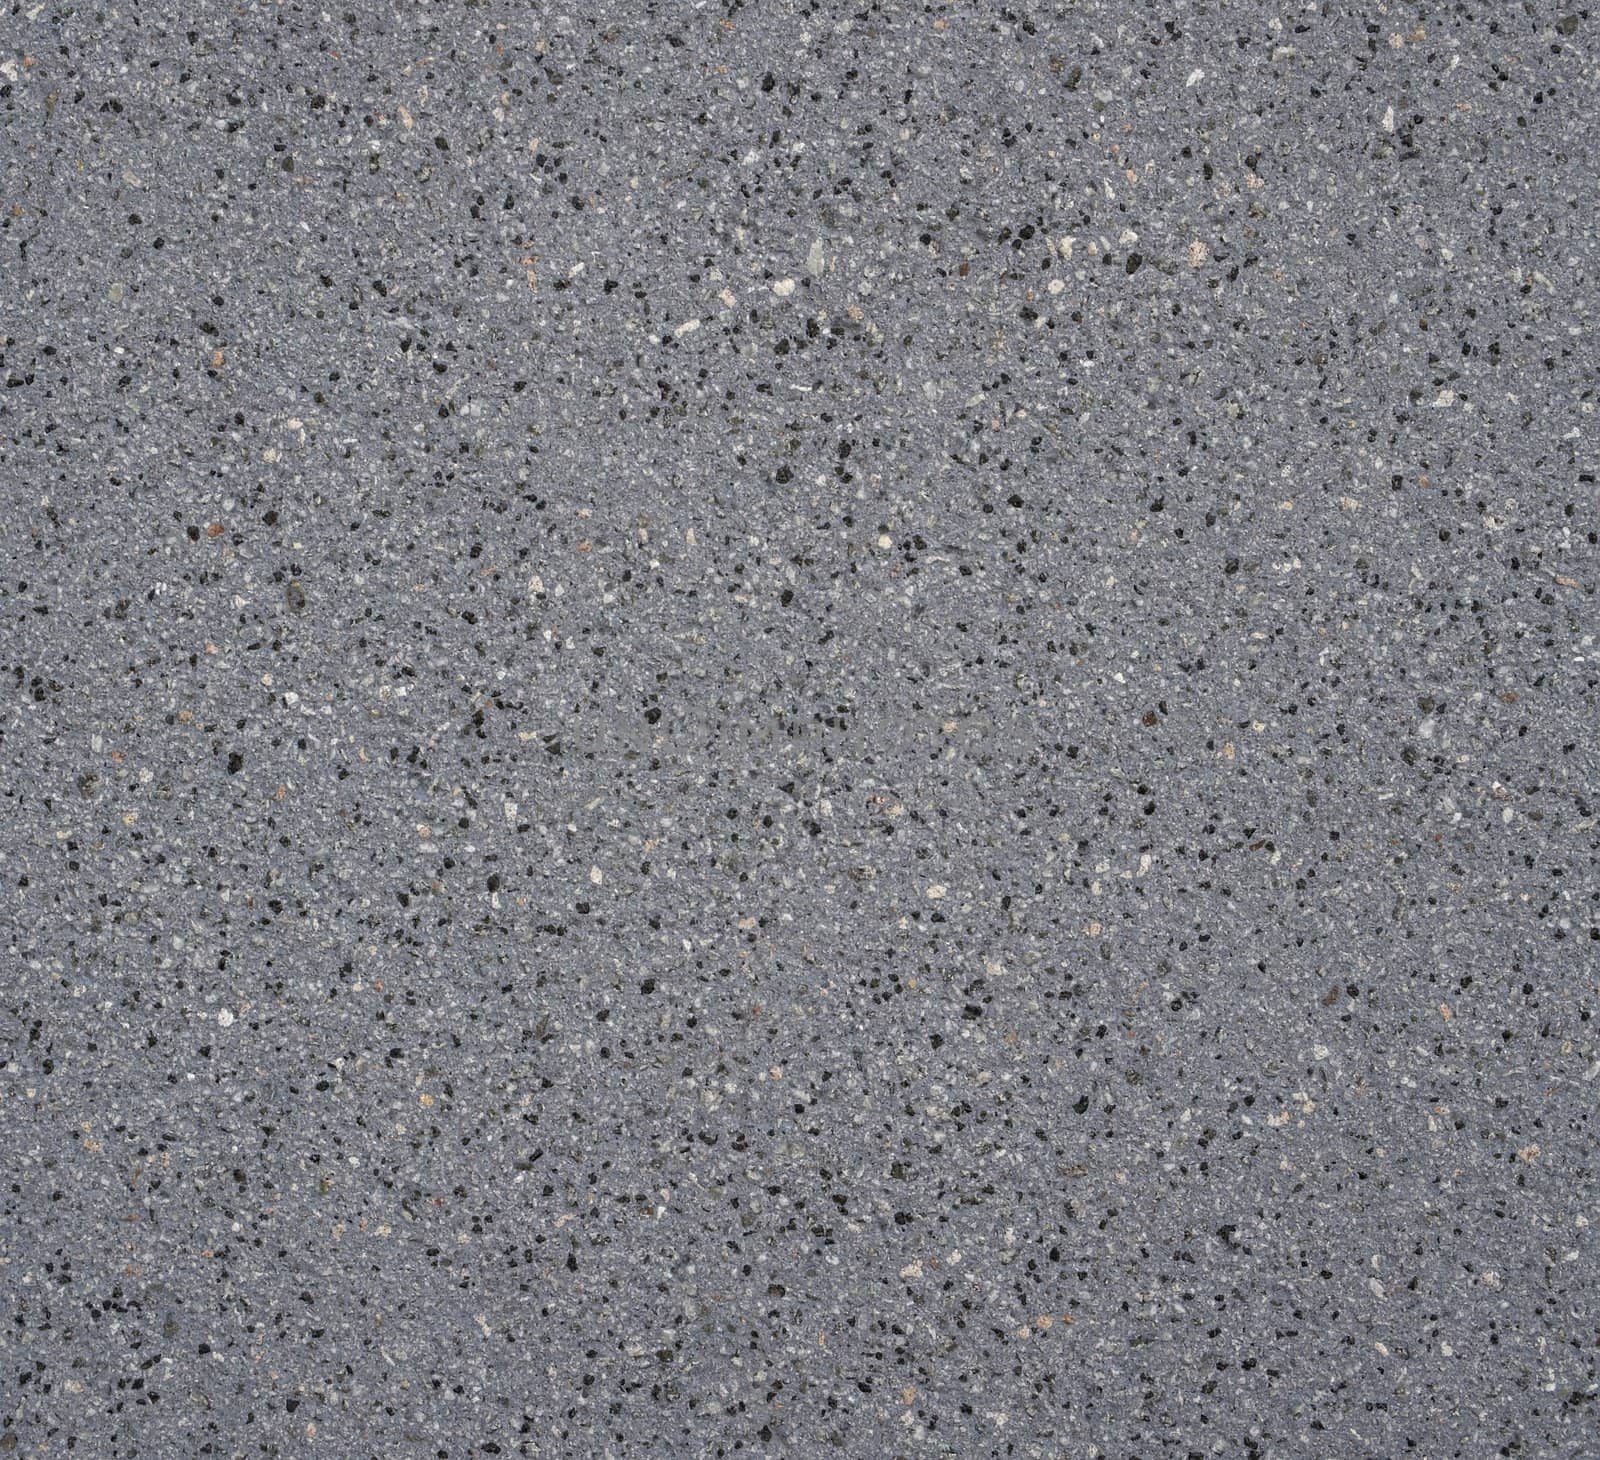 background with grey speckled stone surface